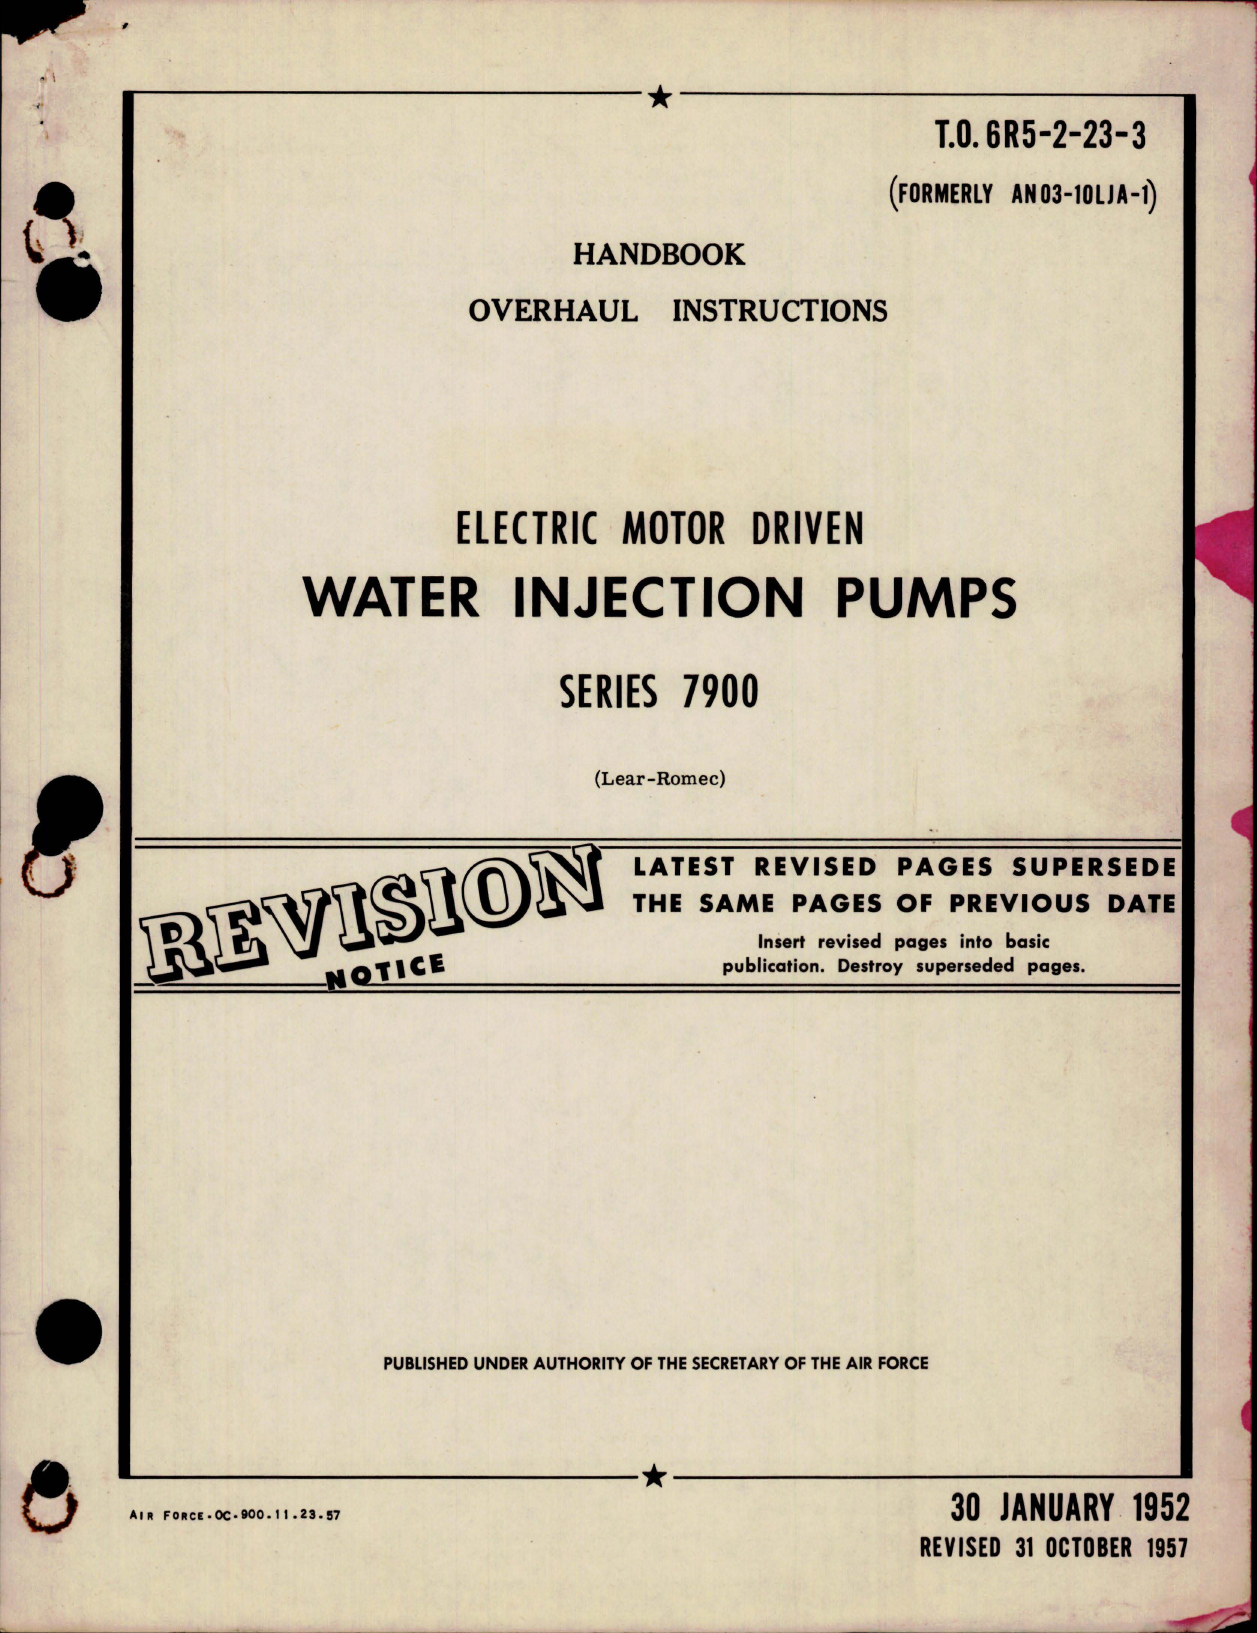 Sample page 1 from AirCorps Library document: Overhaul Instructions for Electric Motor Driven Water Injection Pumps - Series 7900